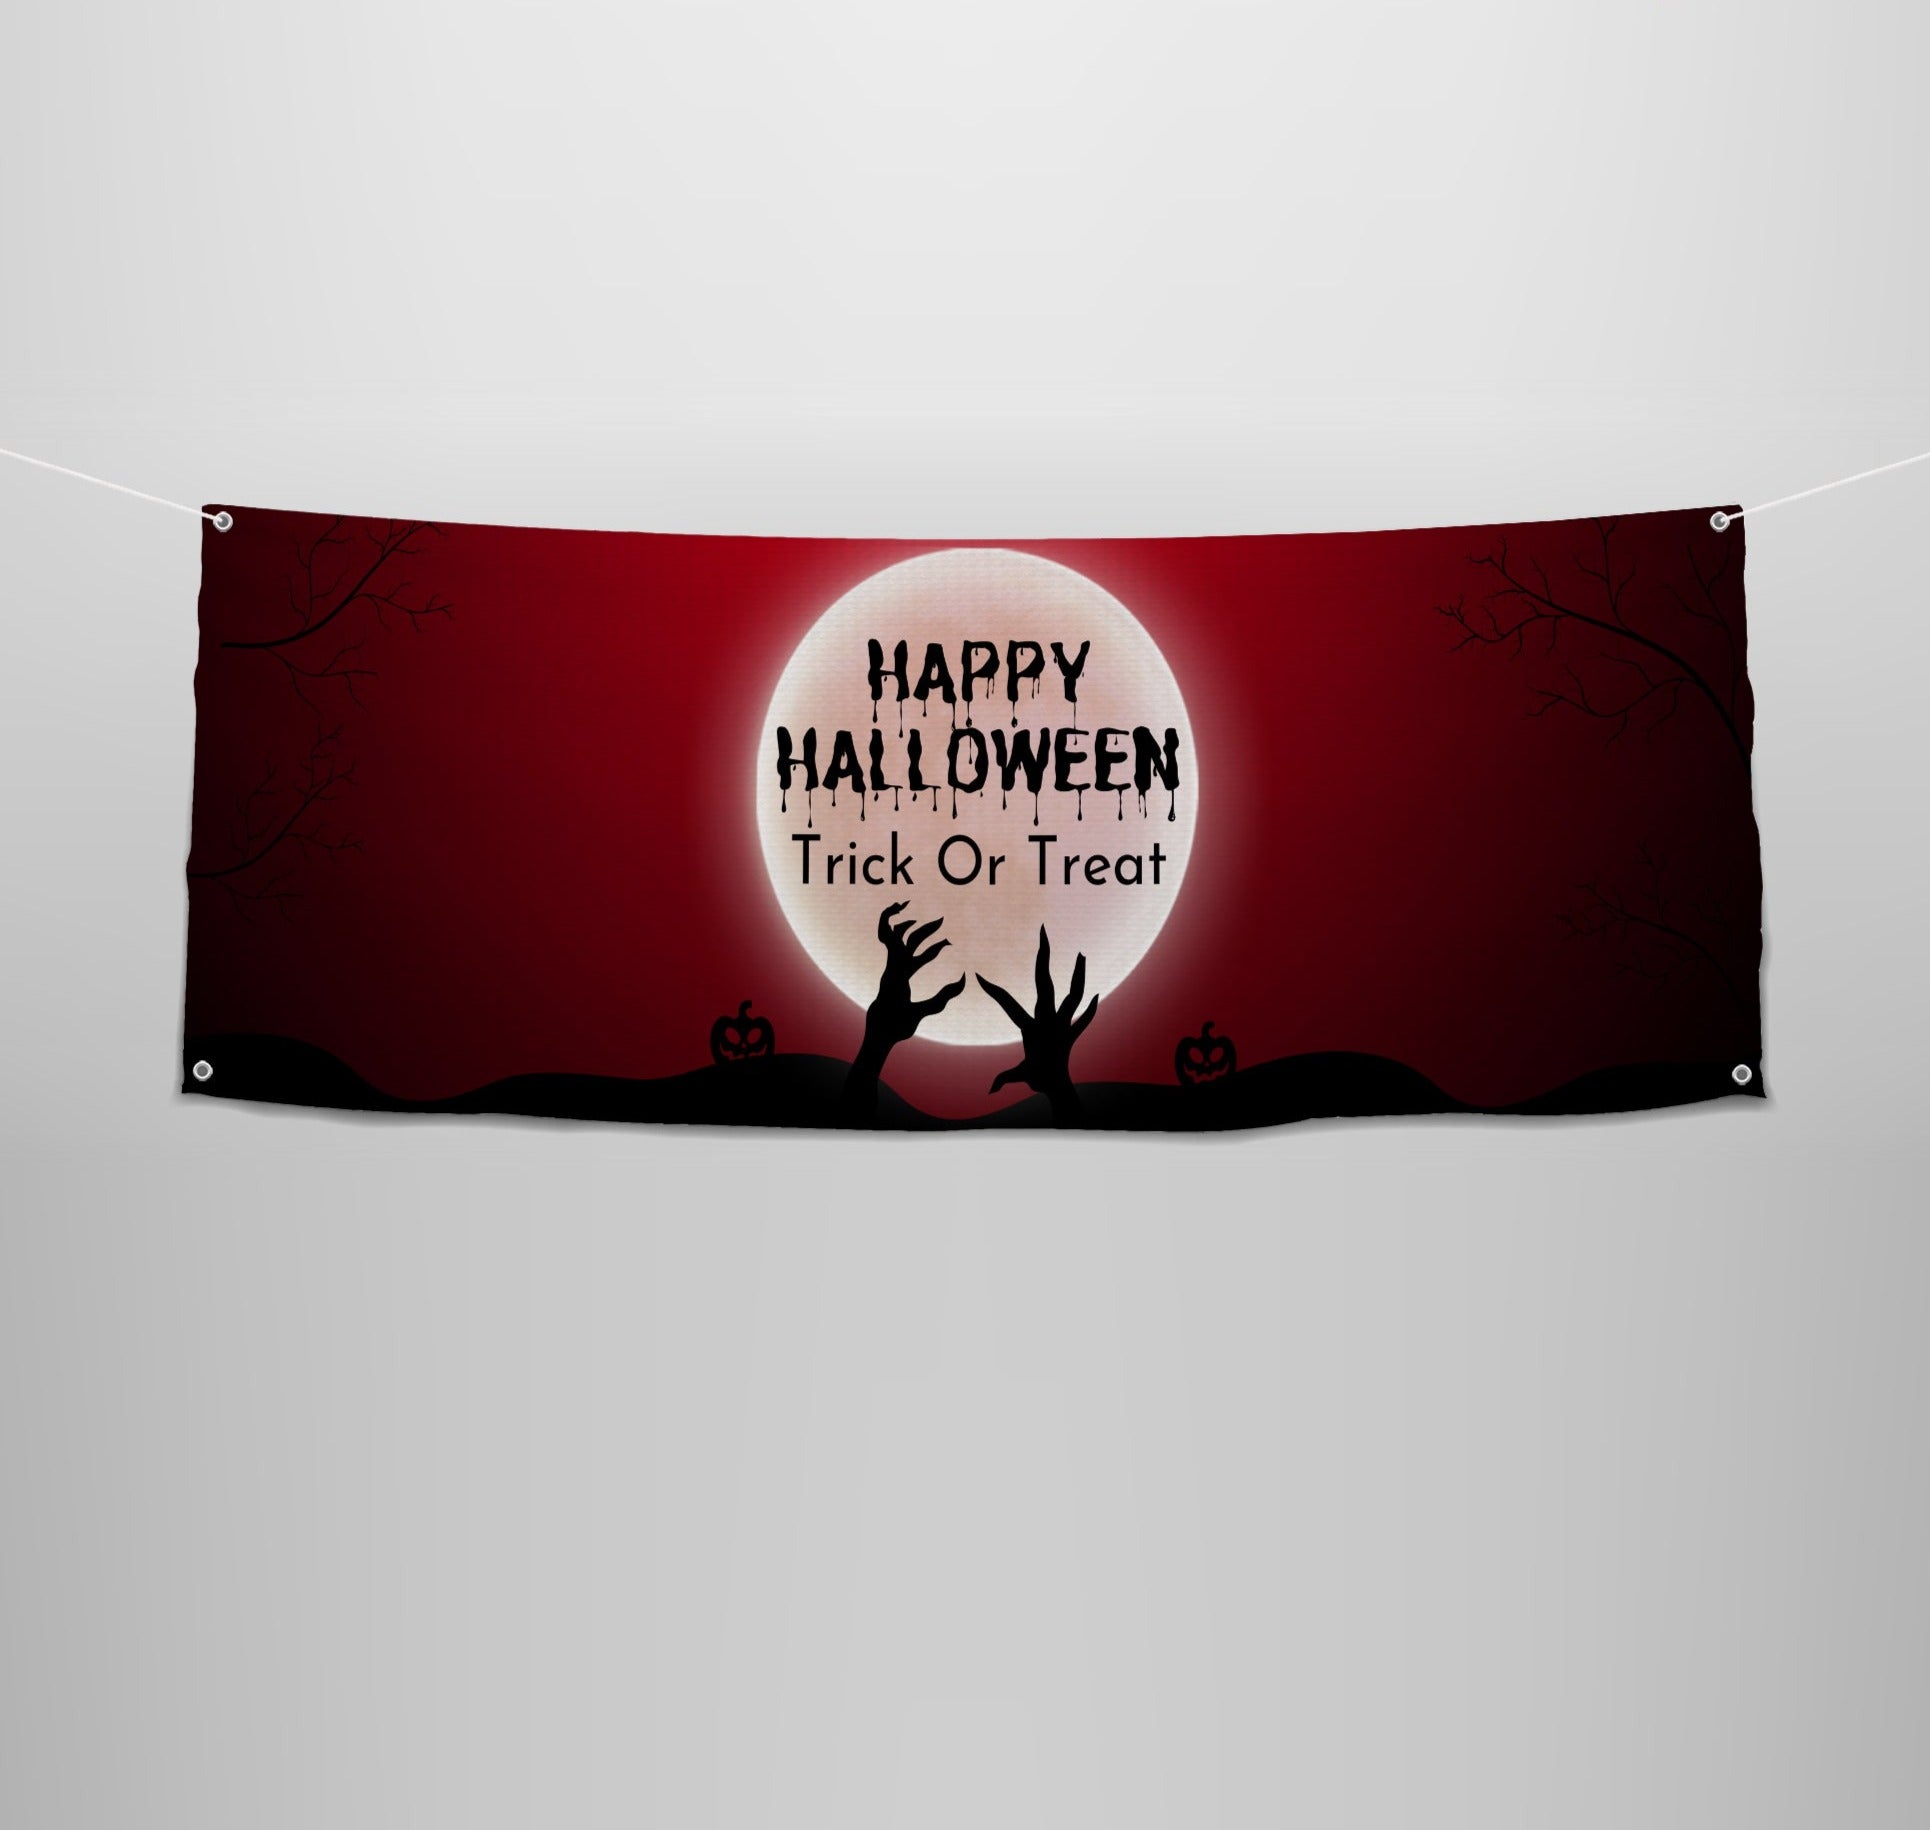 Happy Halloween Trick or Treat Banner: Unearth Size Options, Quality Textile